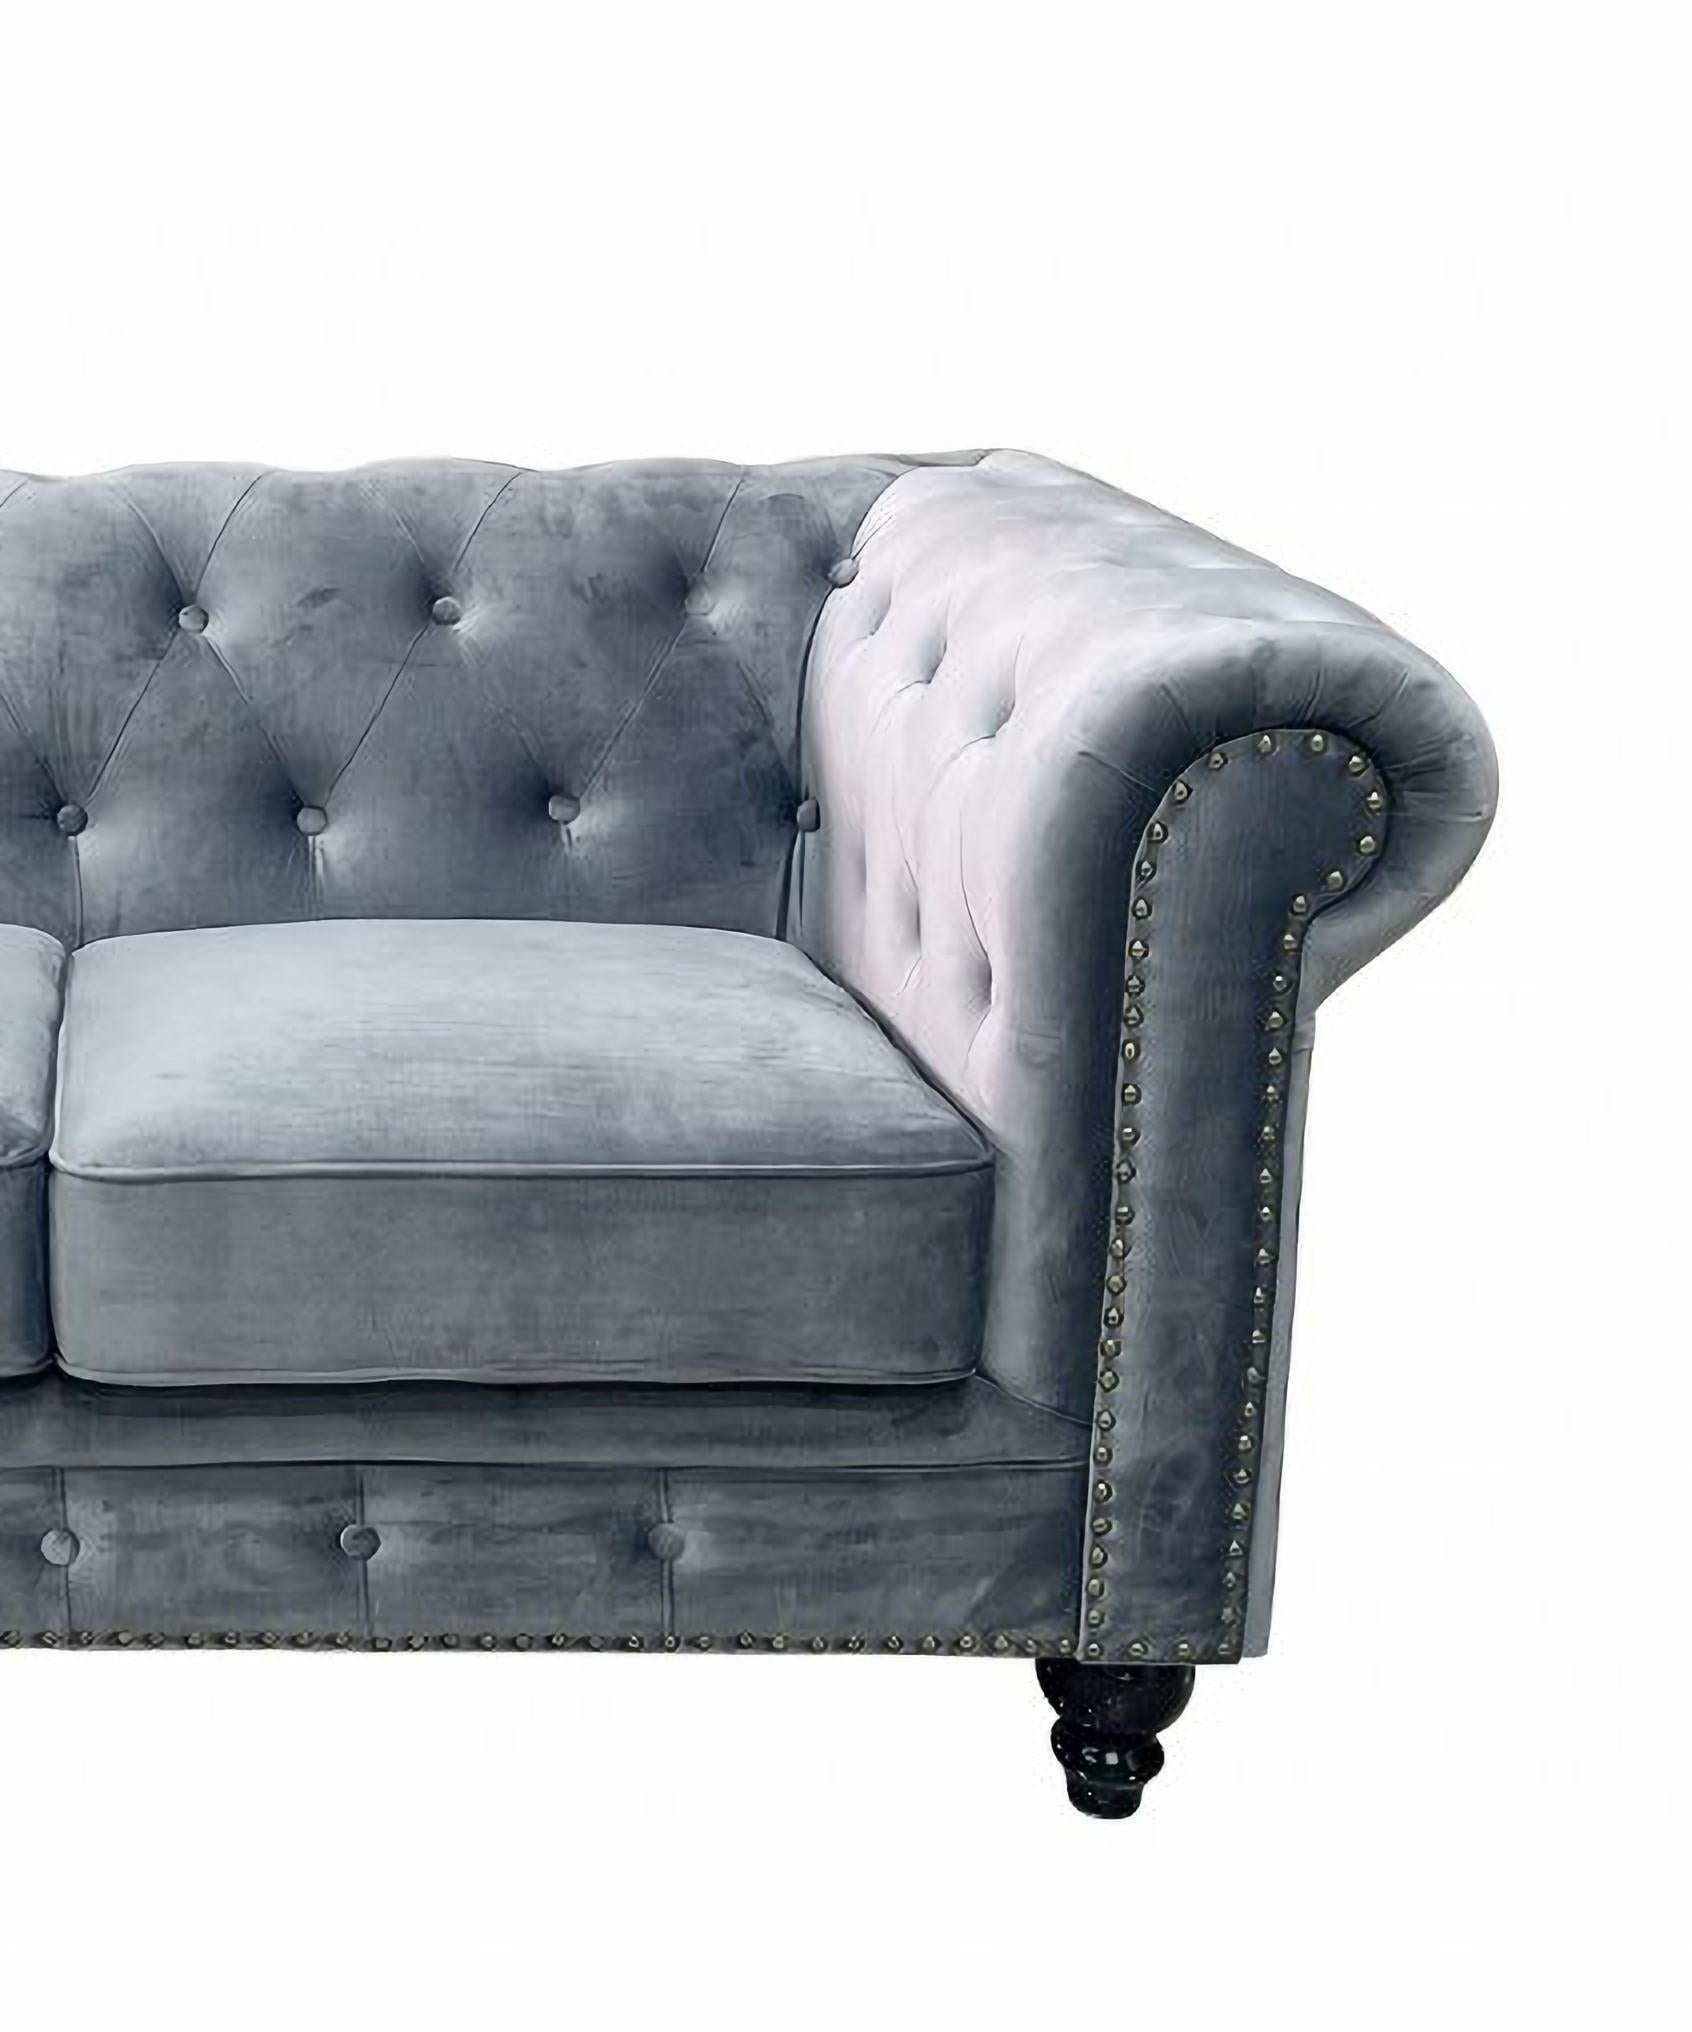 CHESTER PREMIUM 2 seater sofa, grey velvet upholstery.

-Design sofa, 2seats.

-Made with a solid wooden structure.

-High density polyurethane foam.

-Upholstered in navy blue velvet fabric

-2-seater sofa to match, optional

-Other